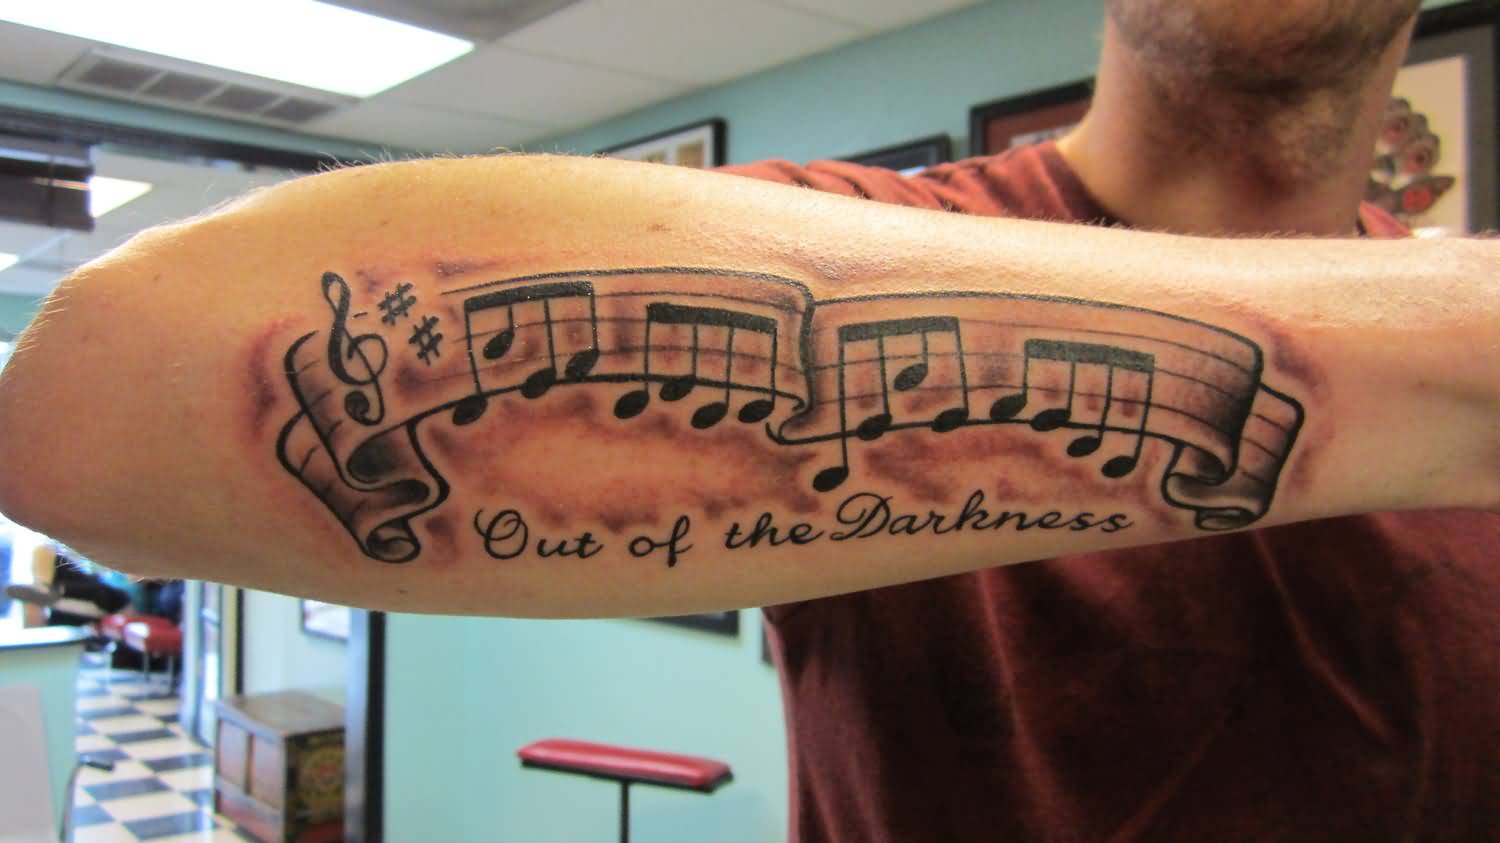 Out Of The Darkness - Black Ink Music Knots Tattoo On Man Right Arm By Roger McMahon